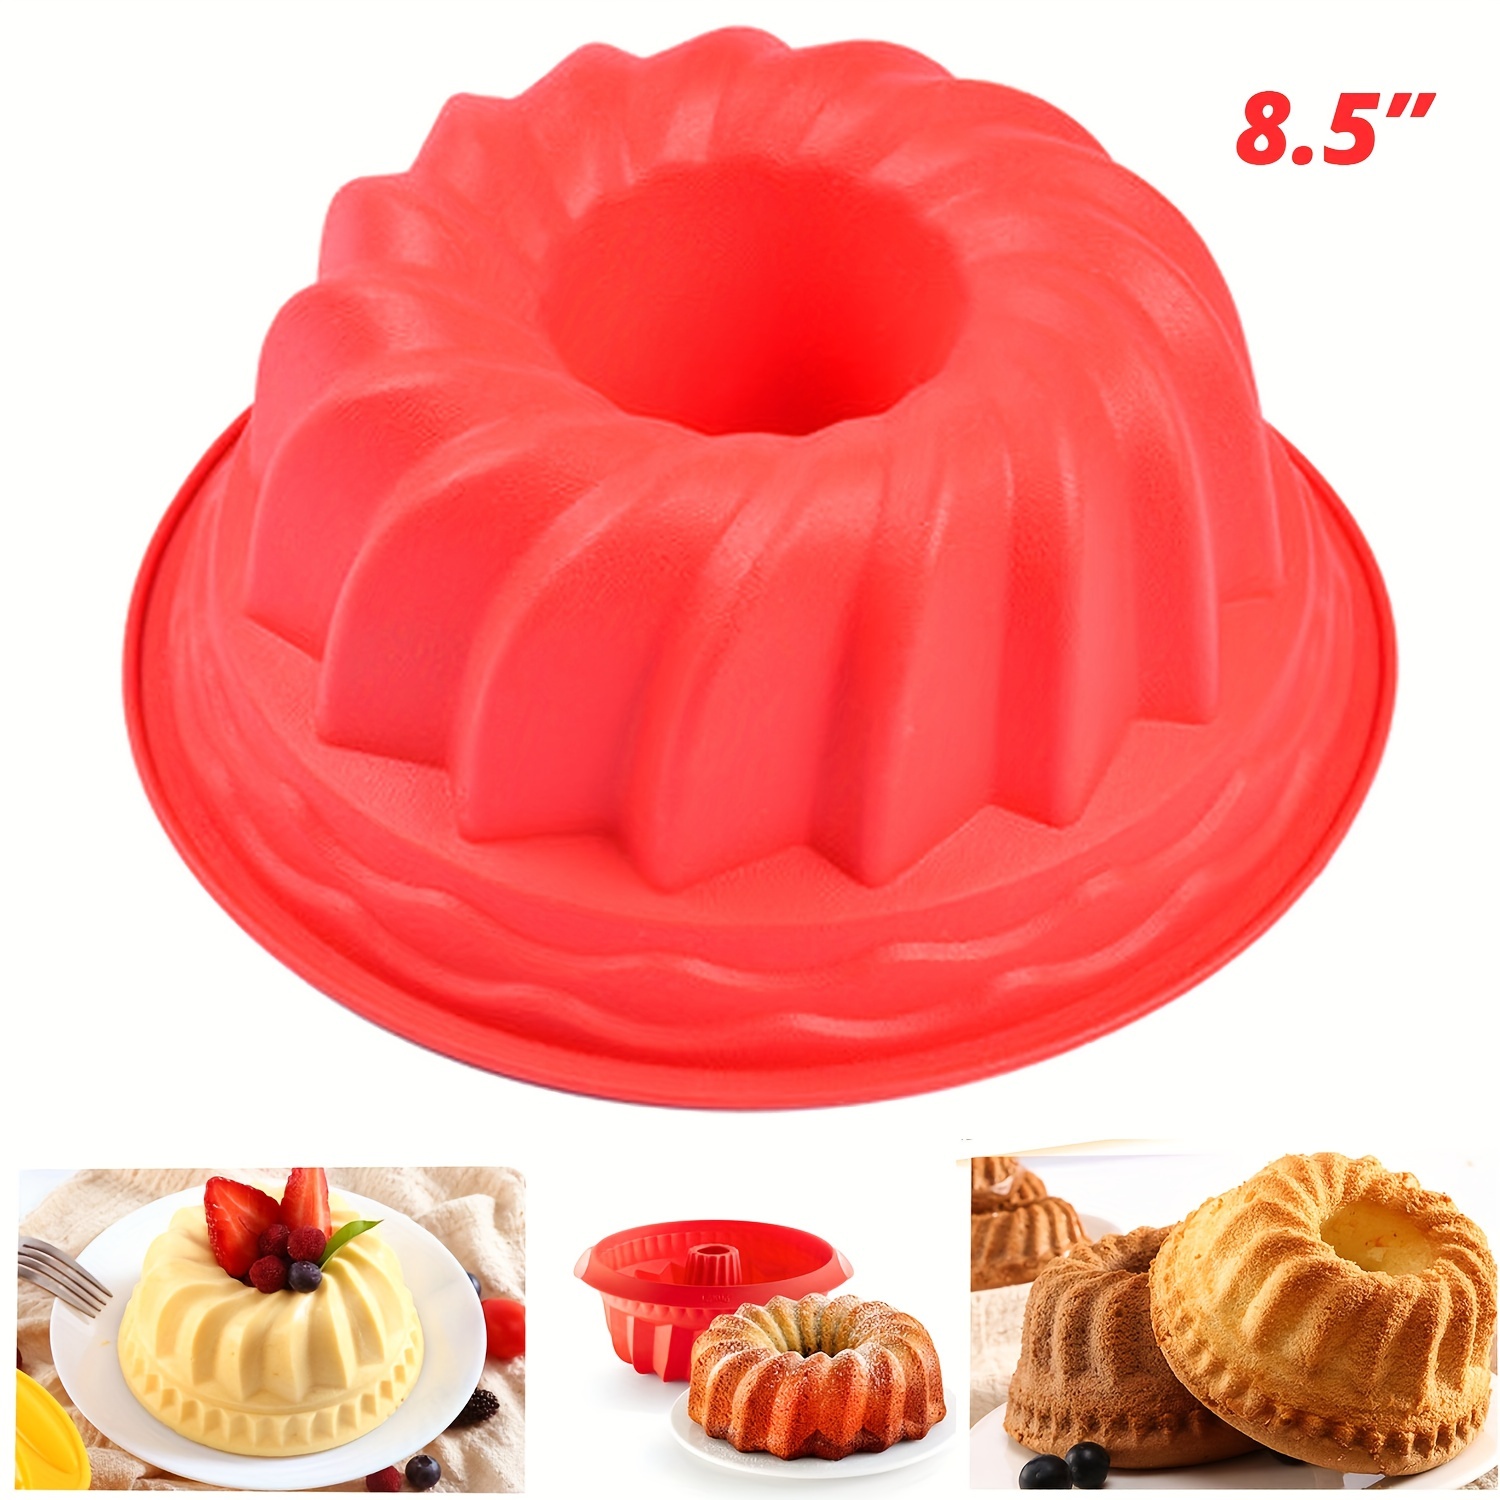 To encounter 10 Inch Silicone Snowflakes Shortbread Pan, 2 Pack Nonstick  Silicone Molds for Baking Layer Cakes, Jelly, Cornbread, with Metal